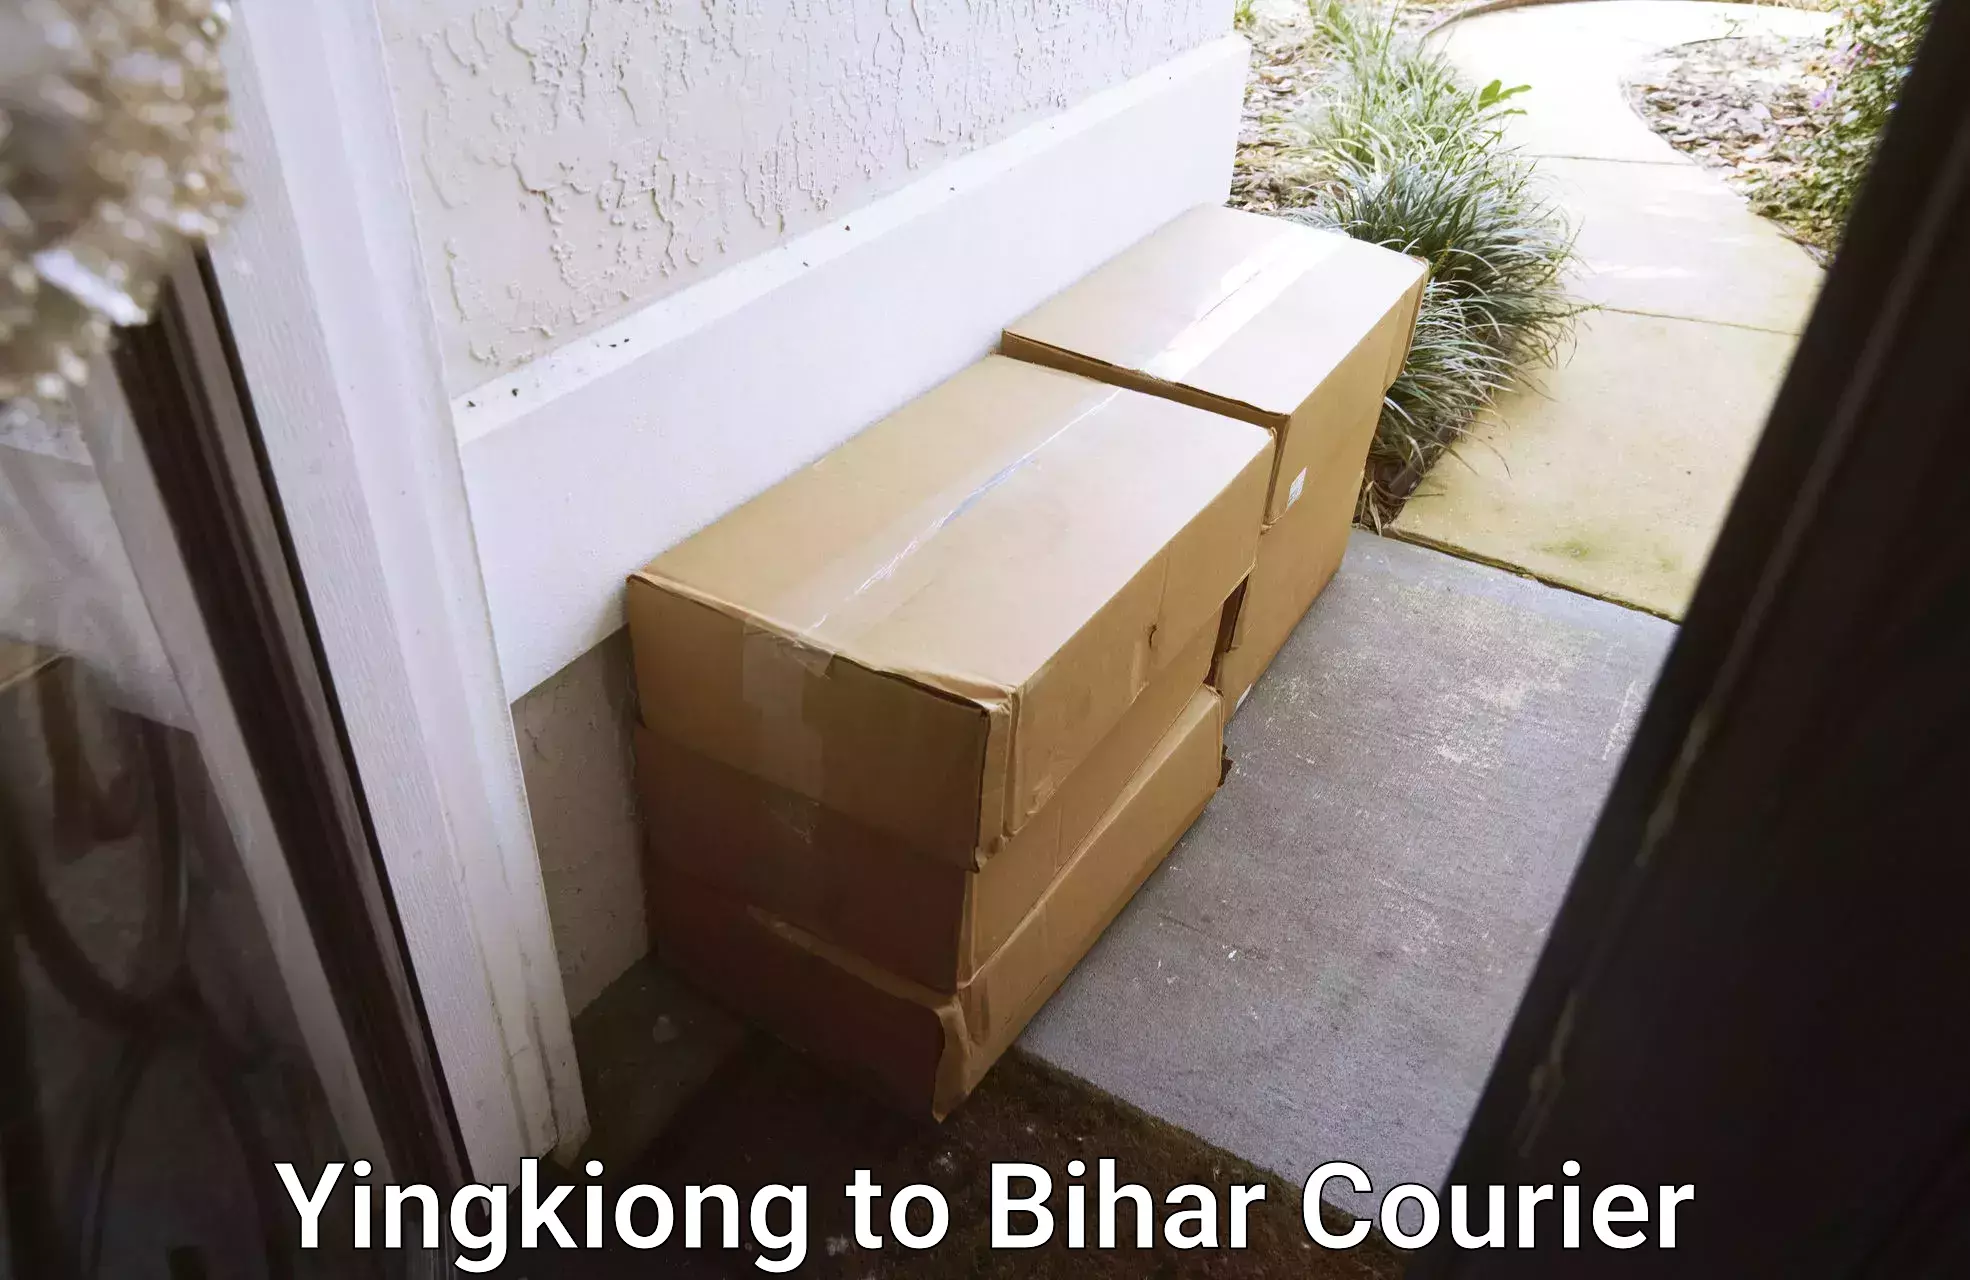 Specialized courier services in Yingkiong to Dhaka